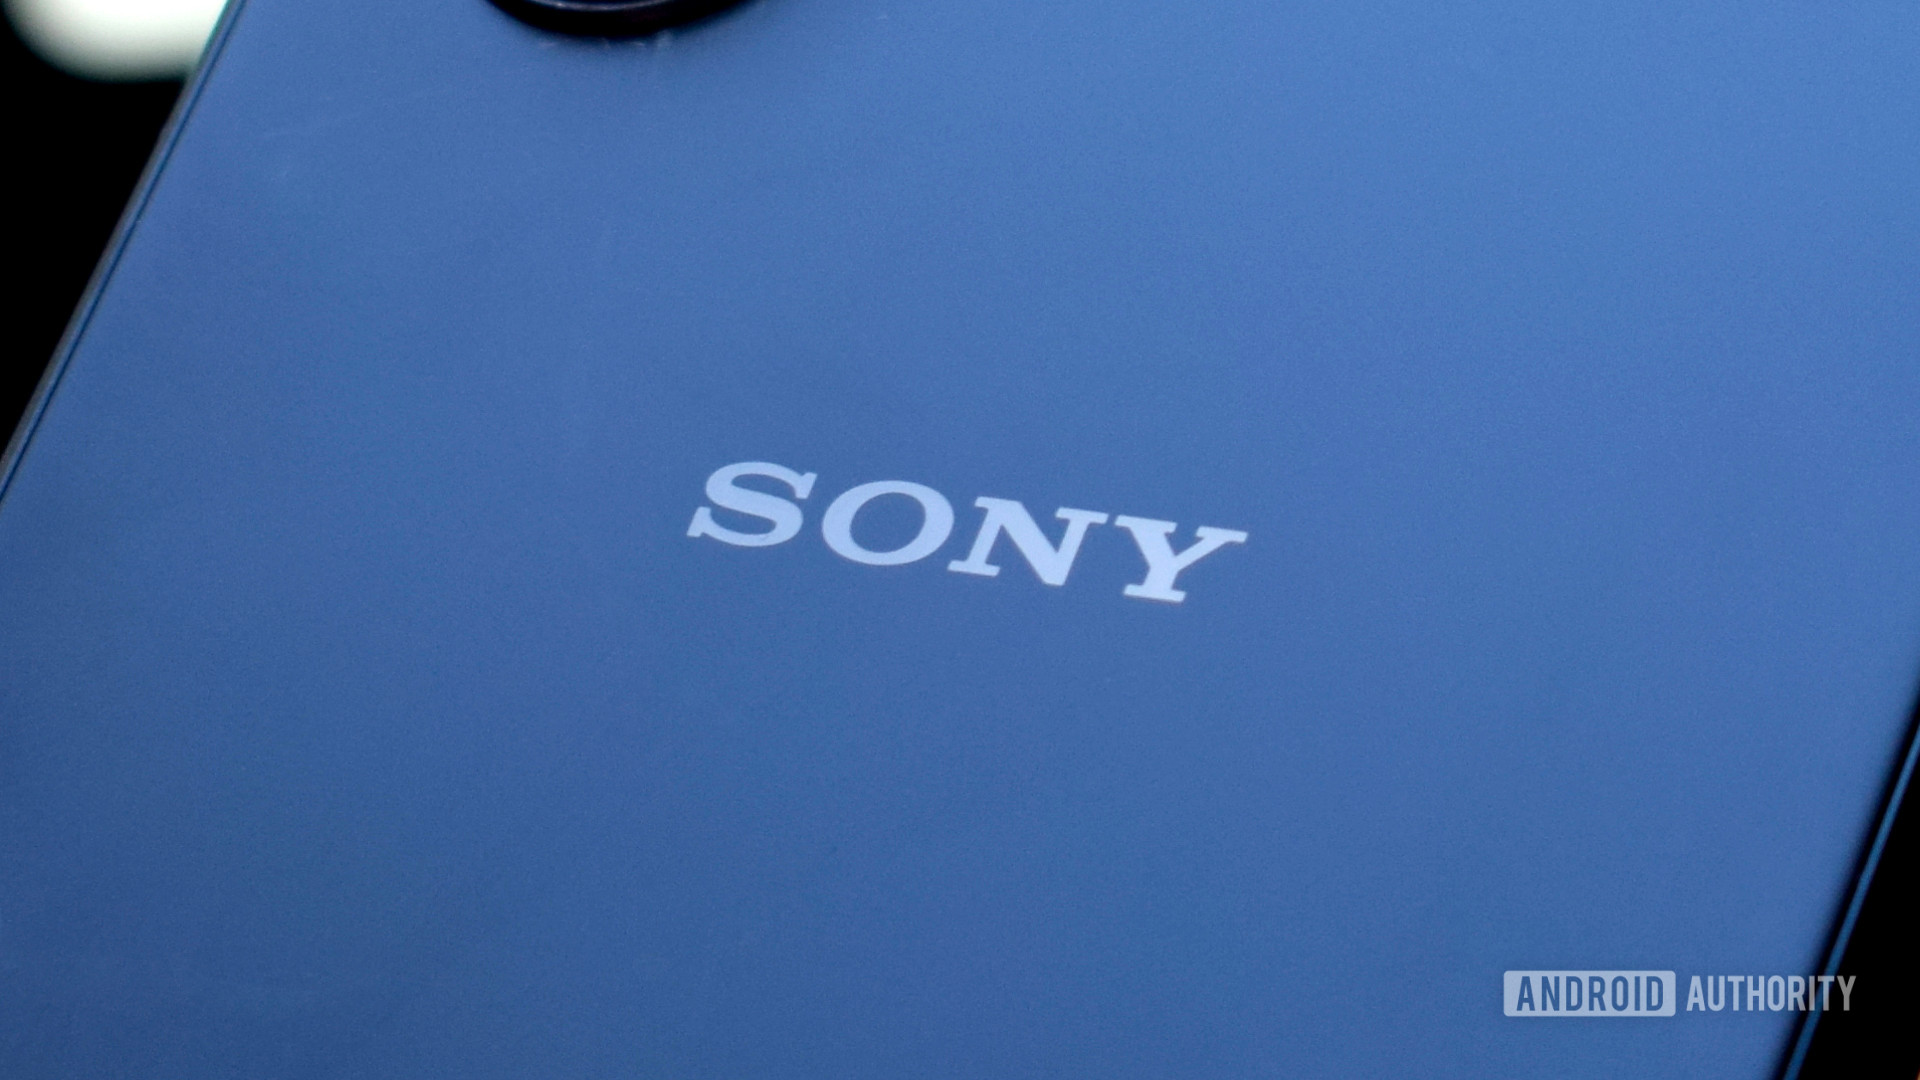 Sony logo from back of Xperia smartphone up close - The best Android wallpapers